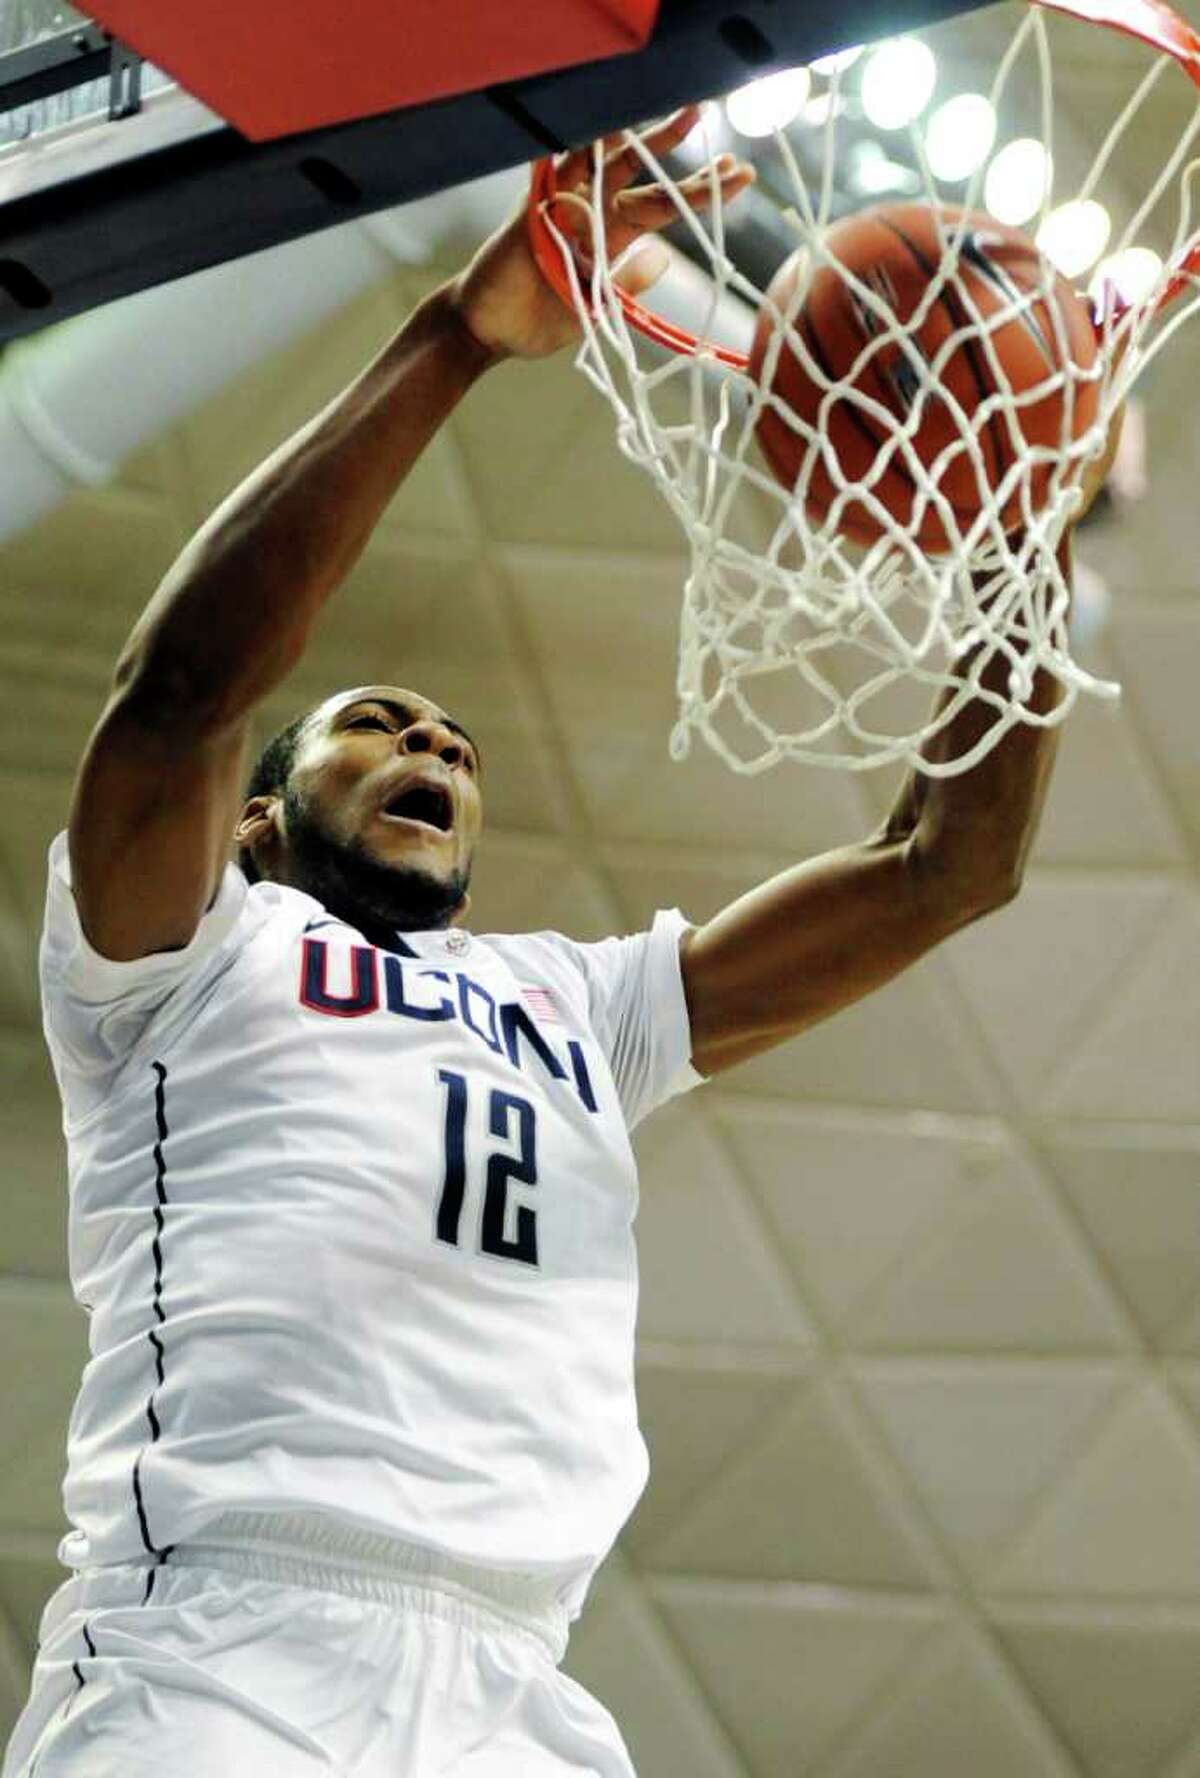 Connecticut's Andre Drummond dunks the ball in the second half of an NCAA college basketball game against Cincinnati in Storrs, Conn., Wednesday, Jan. 18, 2012. Cincinnati won 70-67. (AP Photo/Jessica Hill)